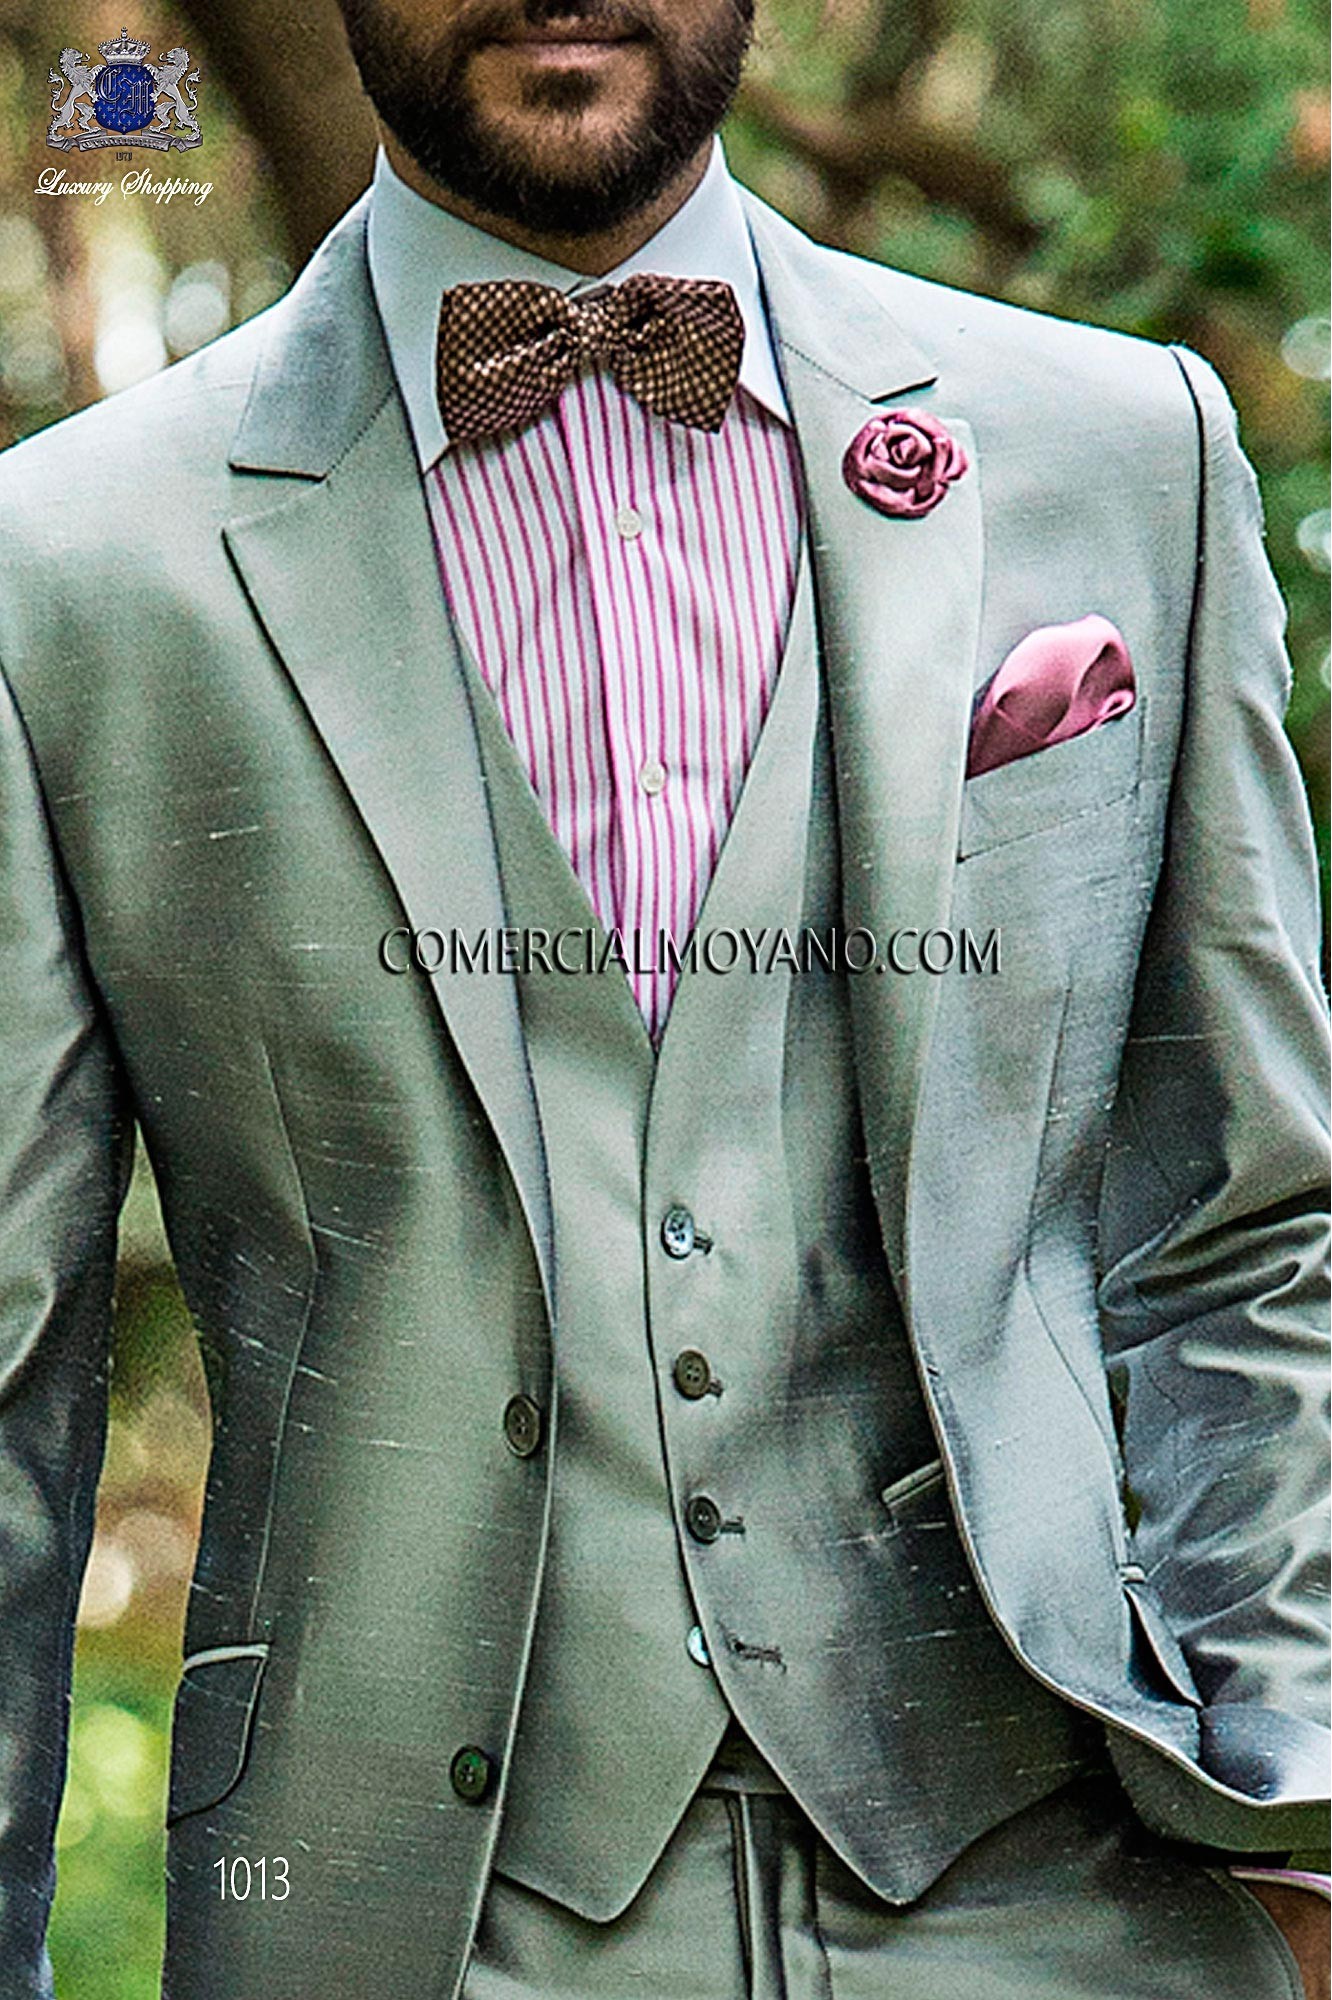 Hipster pearl gray men wedding suit, model: 1013 Mario Moyano Hipster Collection